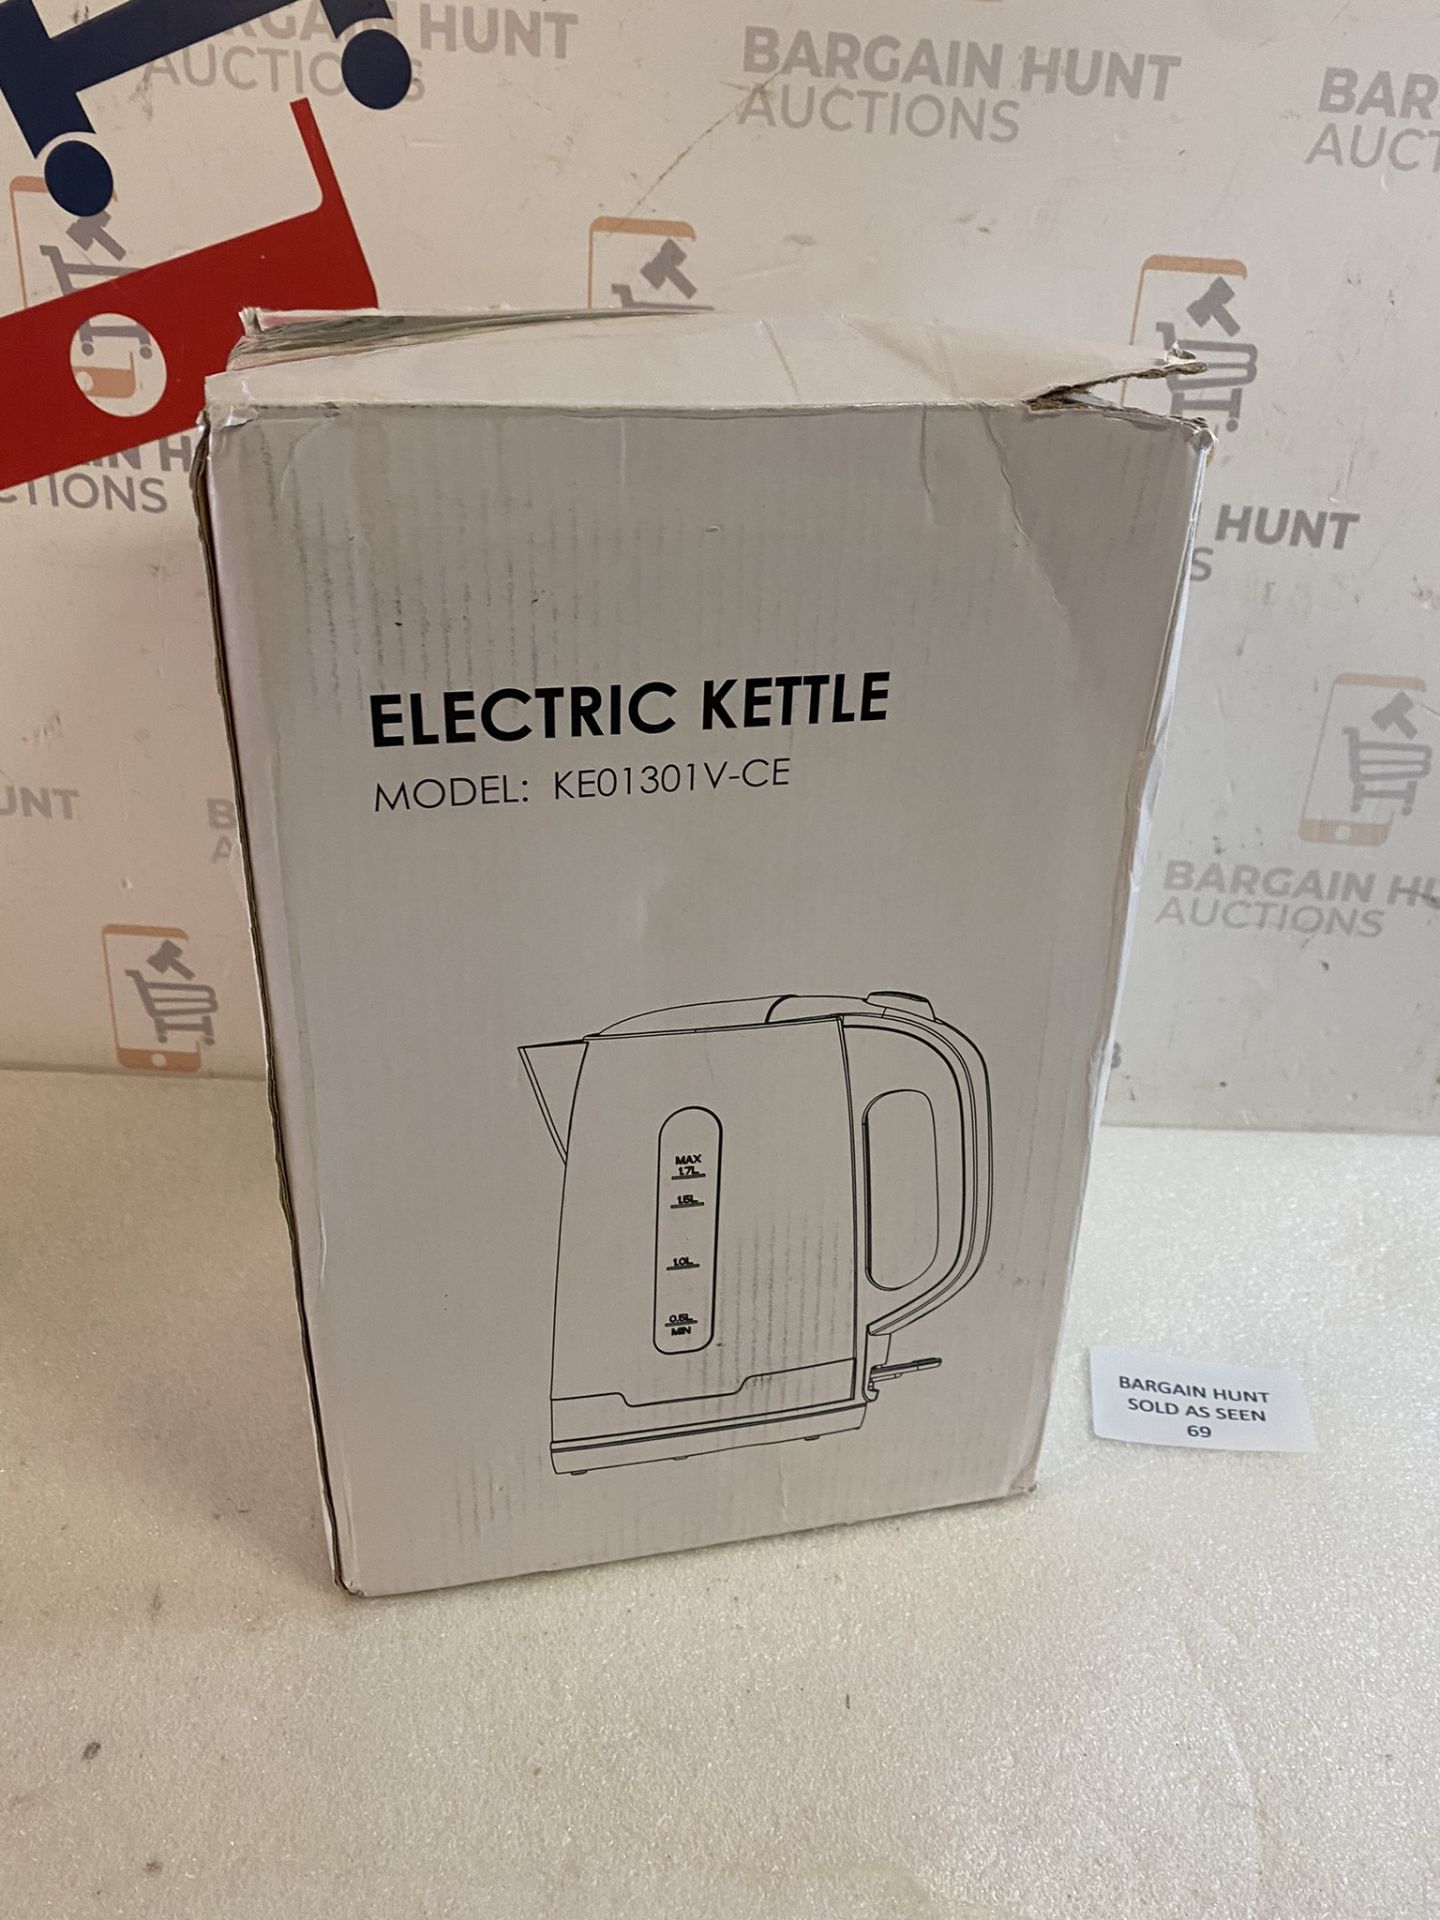 Fohere Electric Kettle 3000W Fast Boil Kettle RRP £25.99 - Image 2 of 2